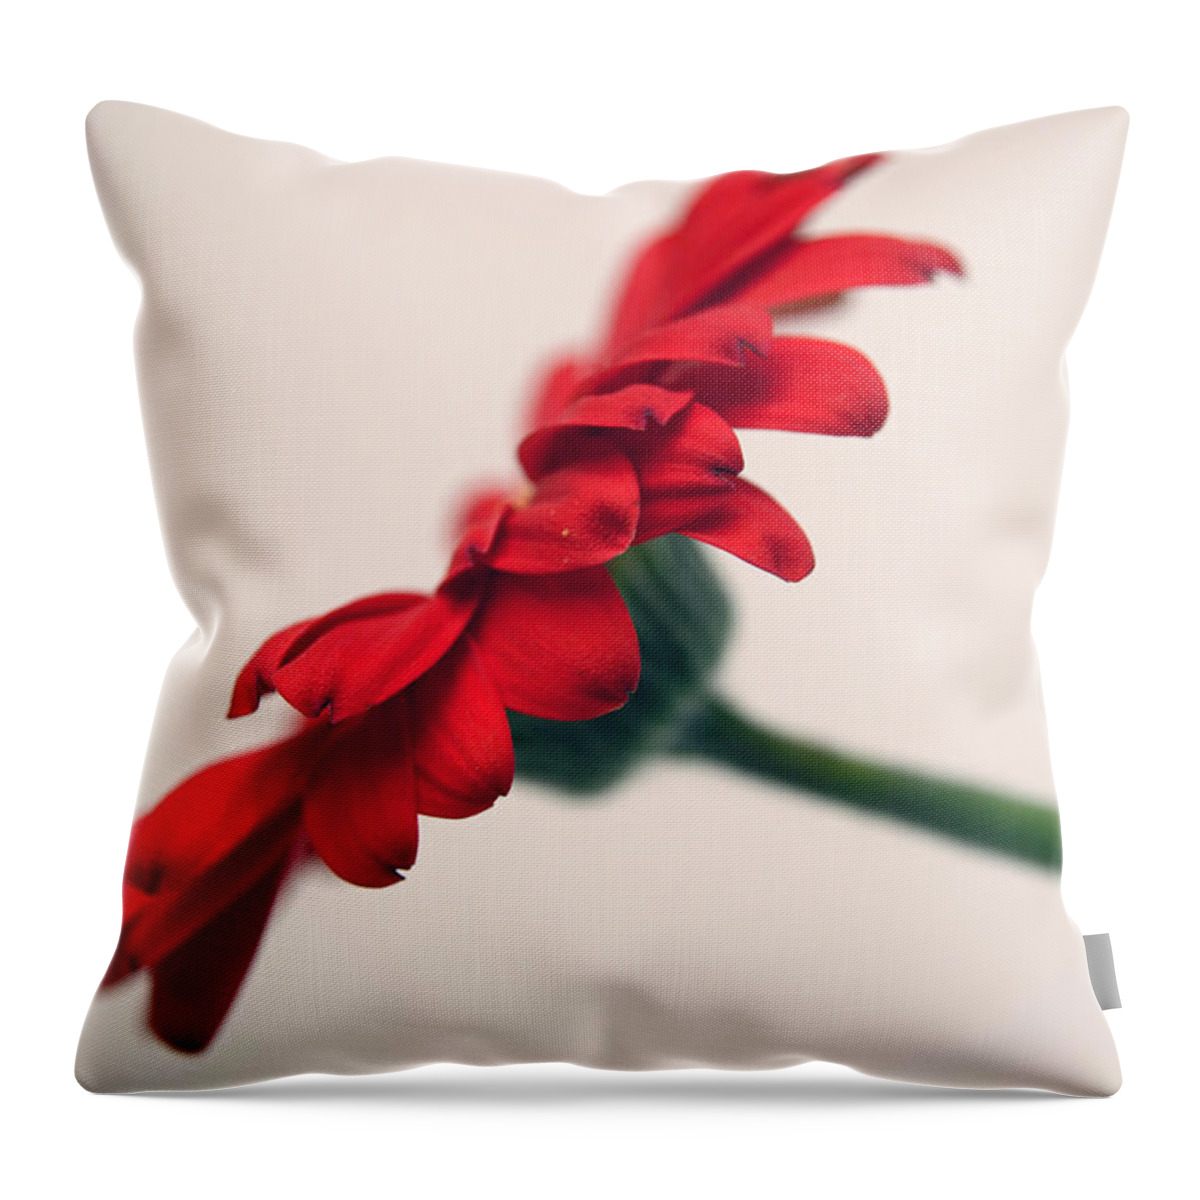 Gerbera Daisy Throw Pillow featuring the photograph Passions Voice by Melanie Moraga